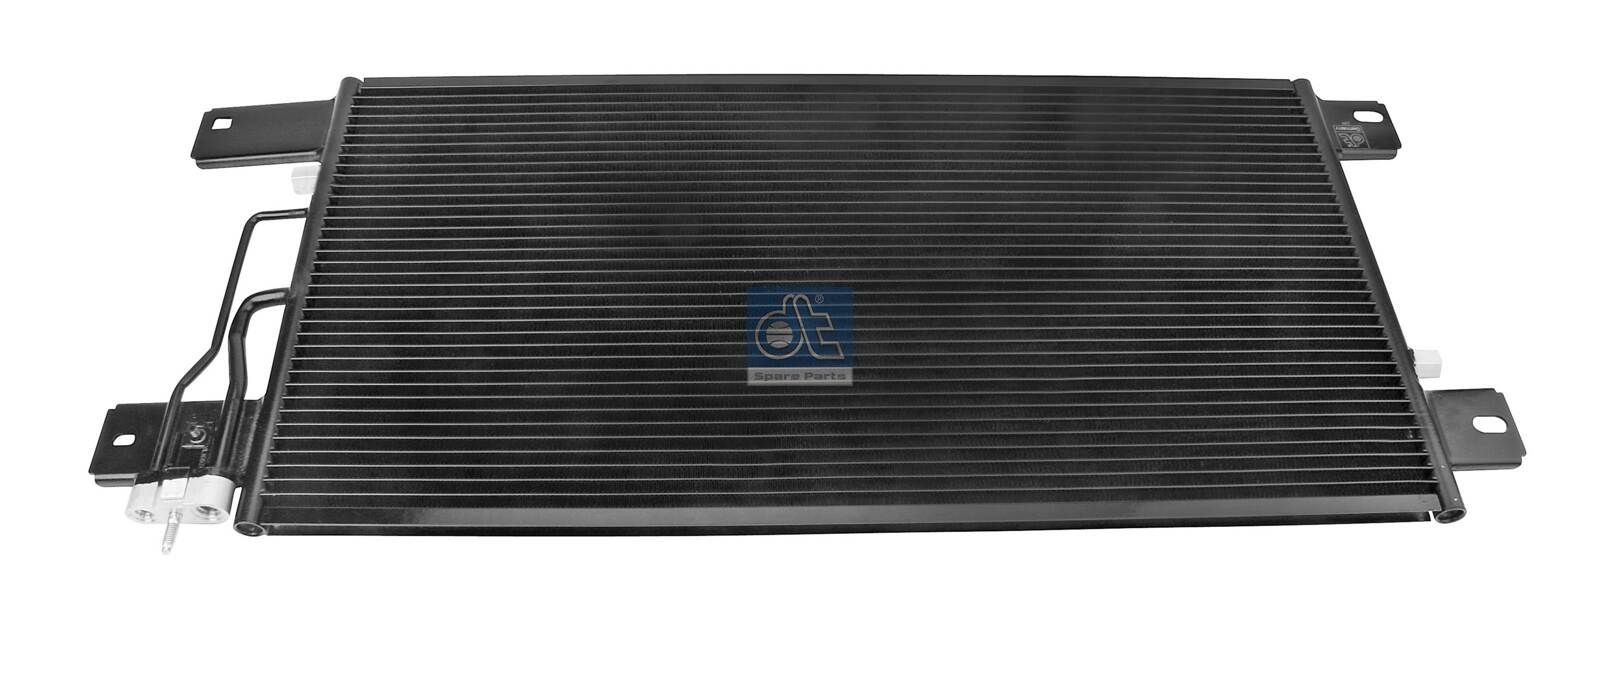 8FC 351 307-361 DT Spare Parts 1.23300 Air conditioning condenser 1446 258